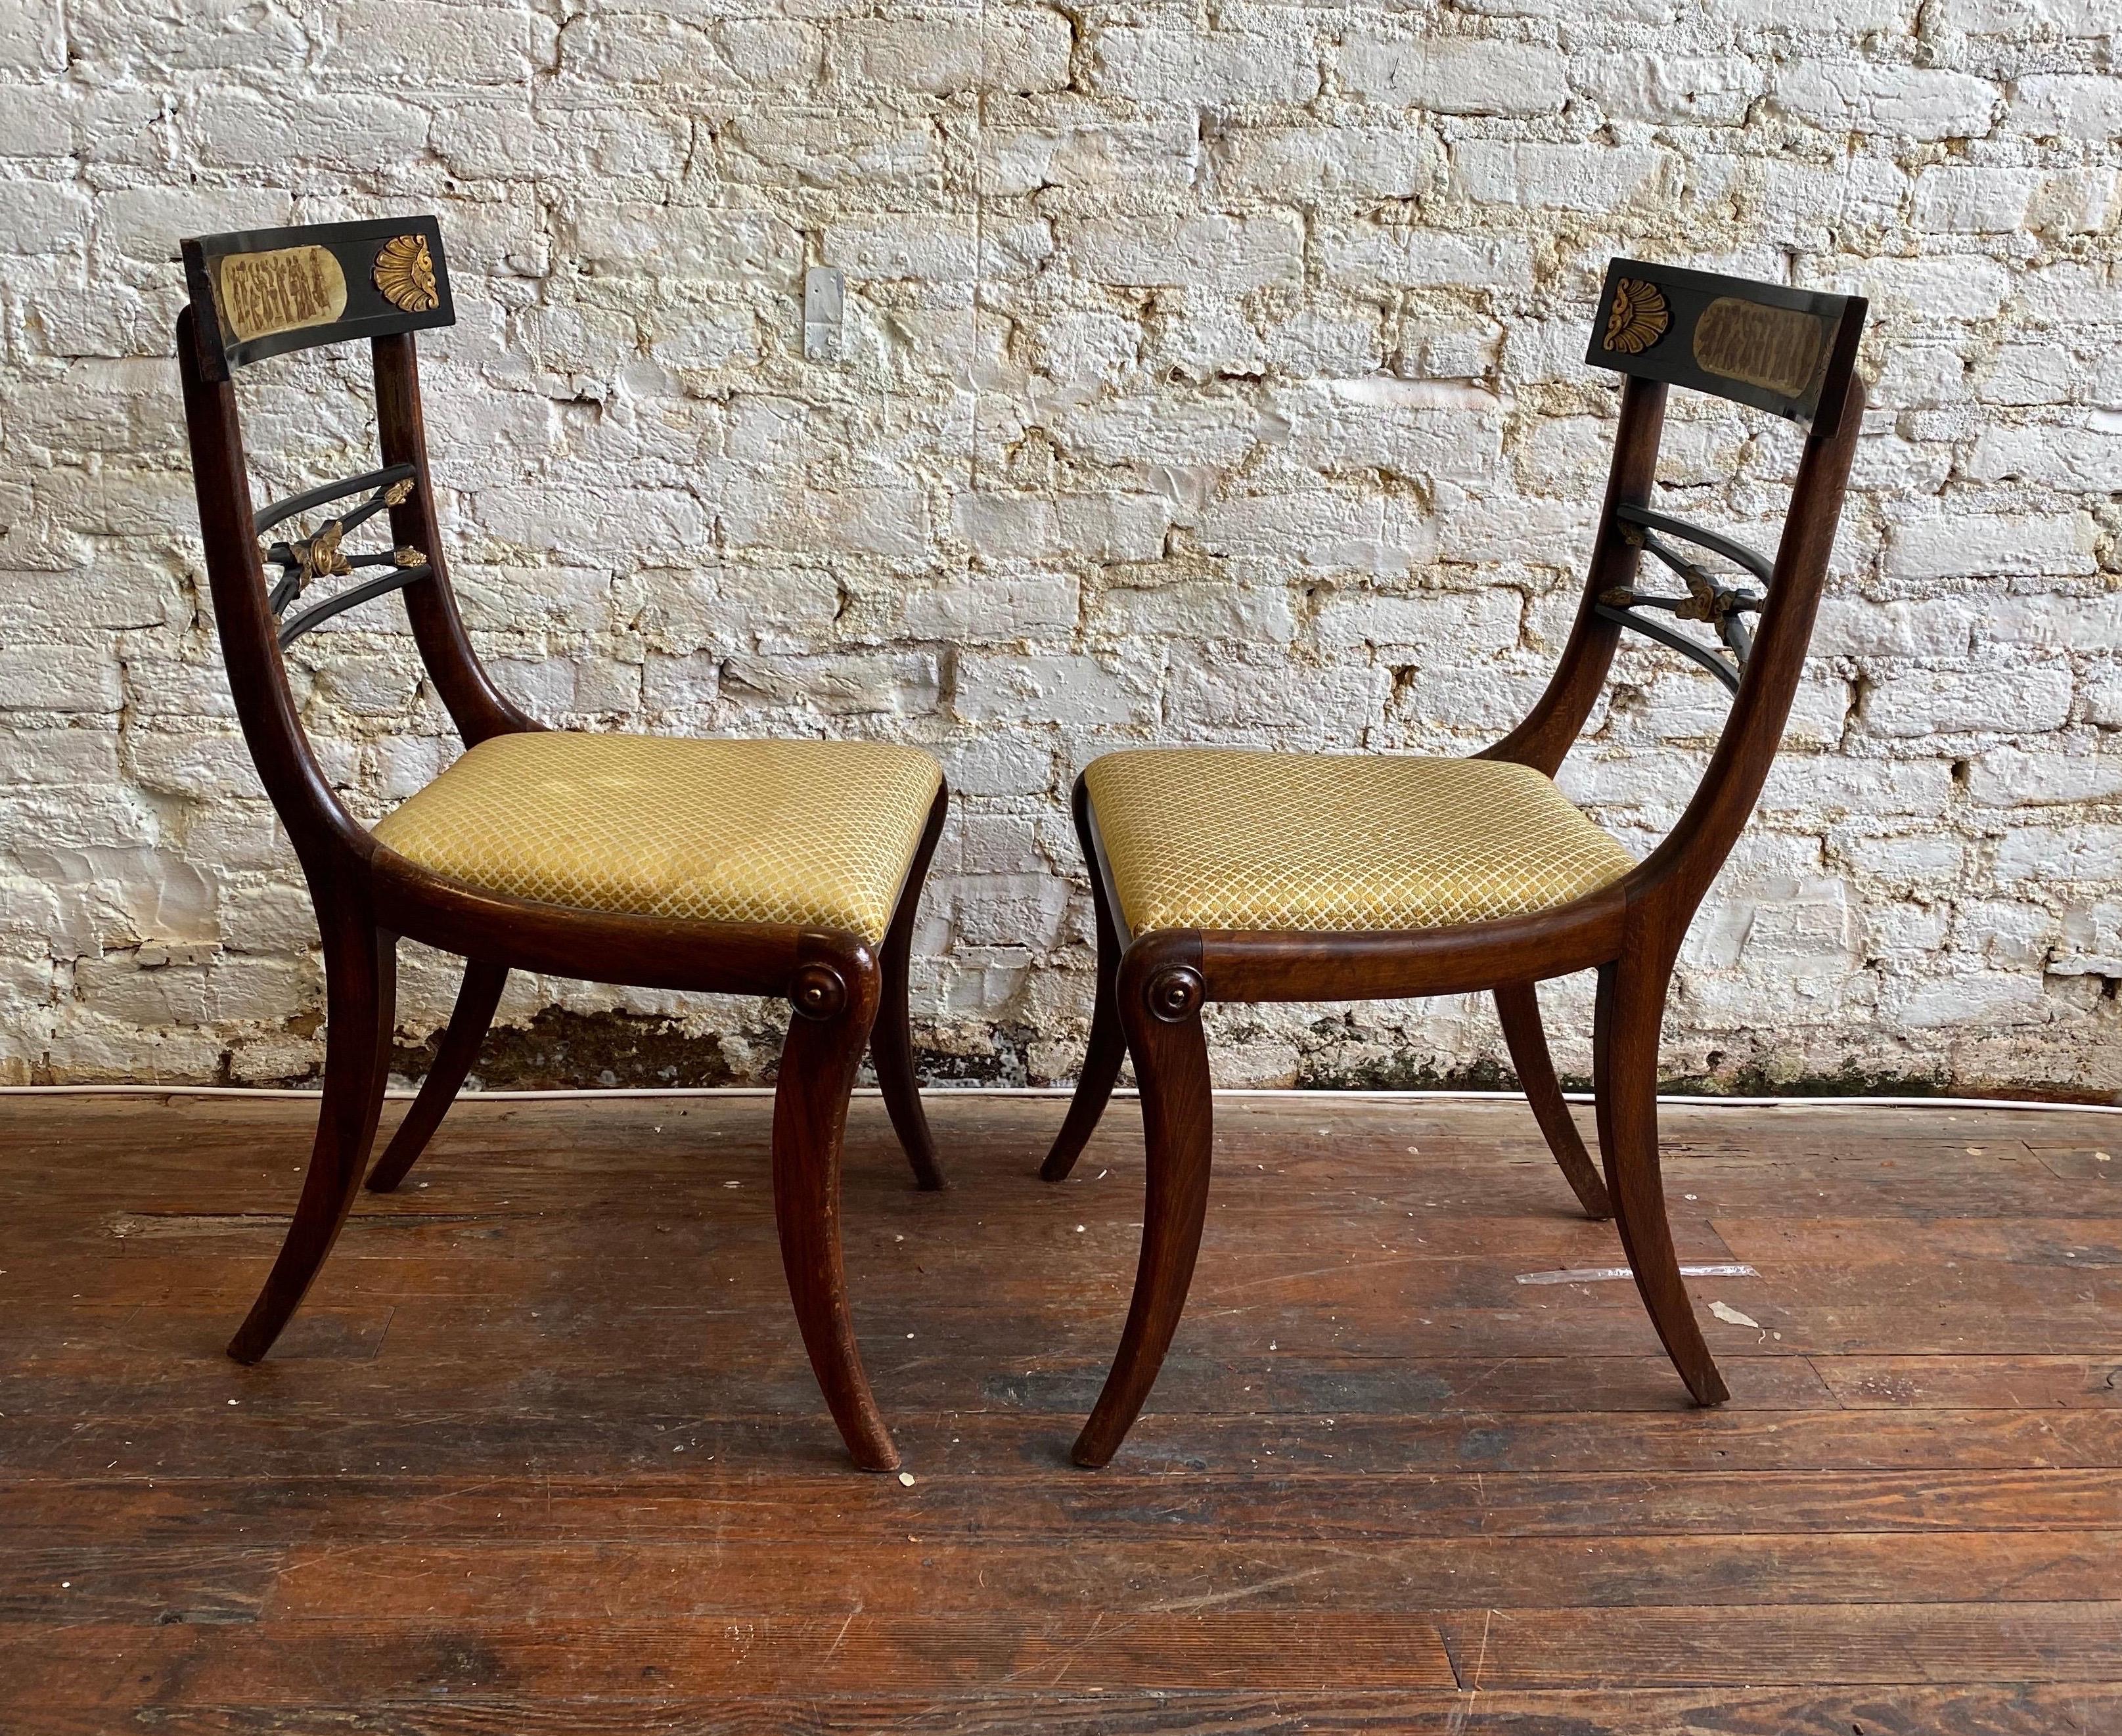 19th Century English Regency Faux Rosewood Chairs with Neoclassical Scenes, Pair 2